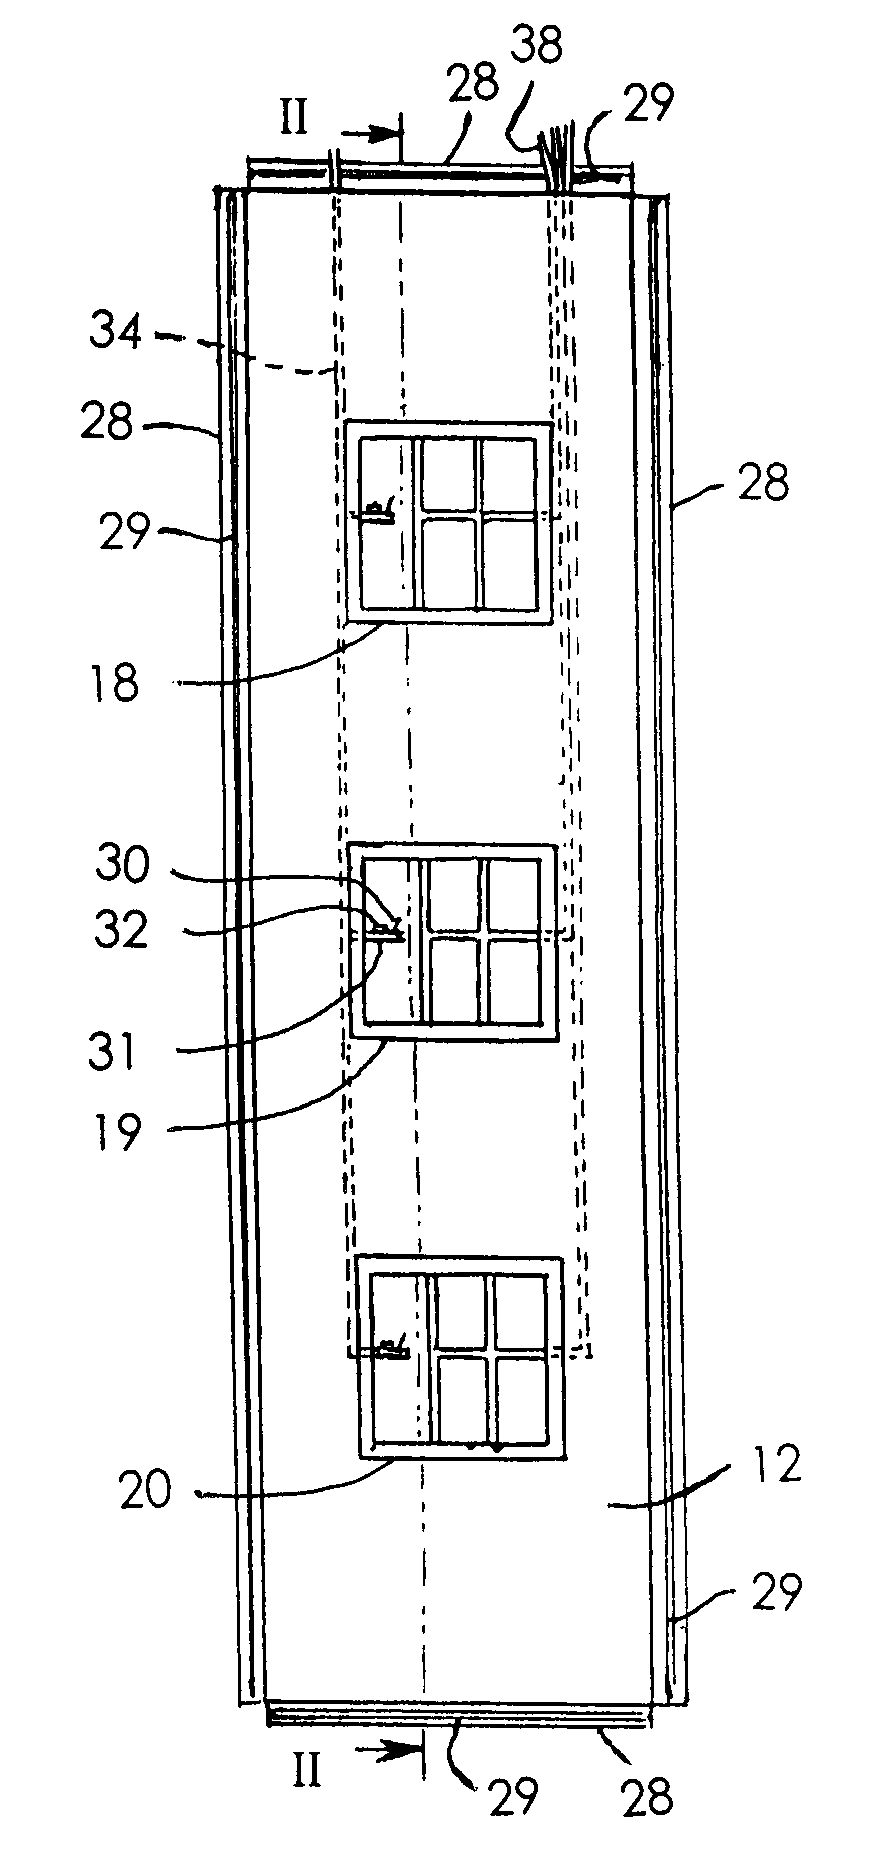 Heat flow measurement tool for a rack mounted assembly of electronic equipment